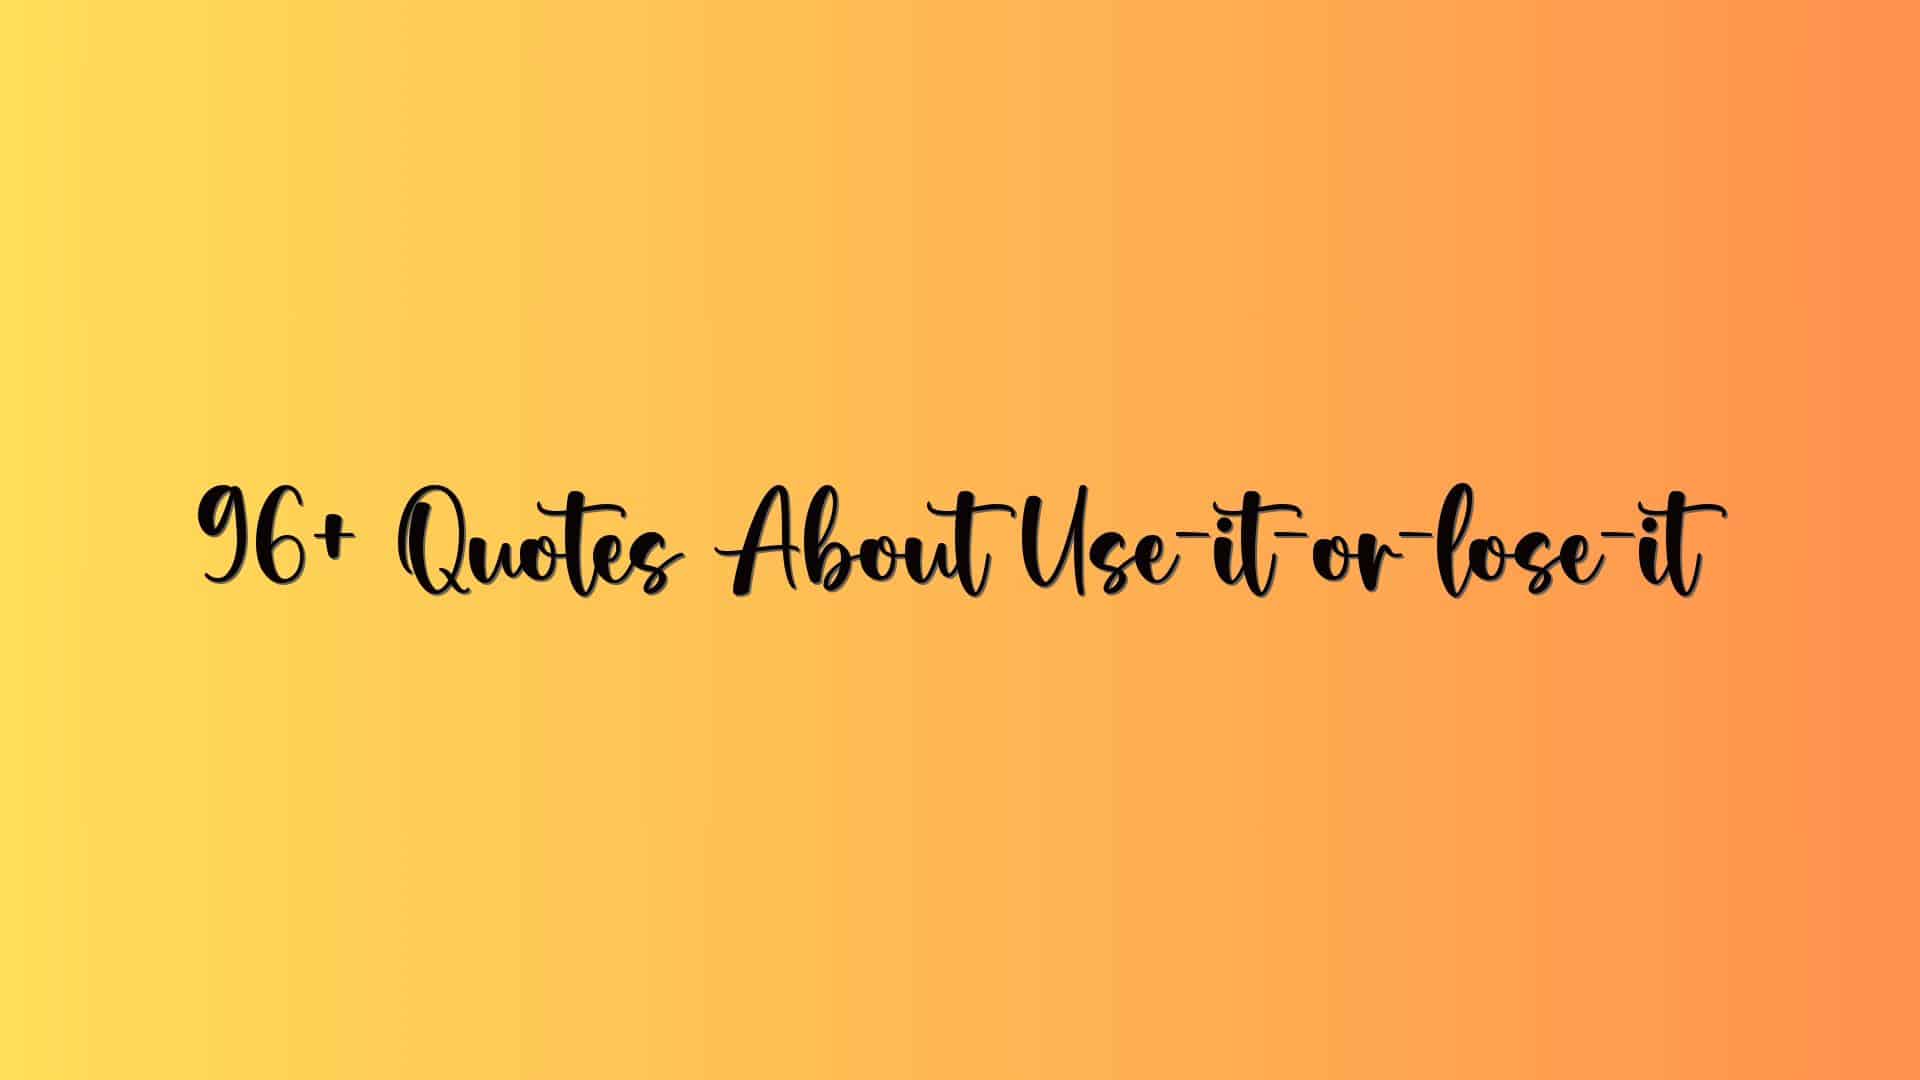 96+ Quotes About Use-it-or-lose-it